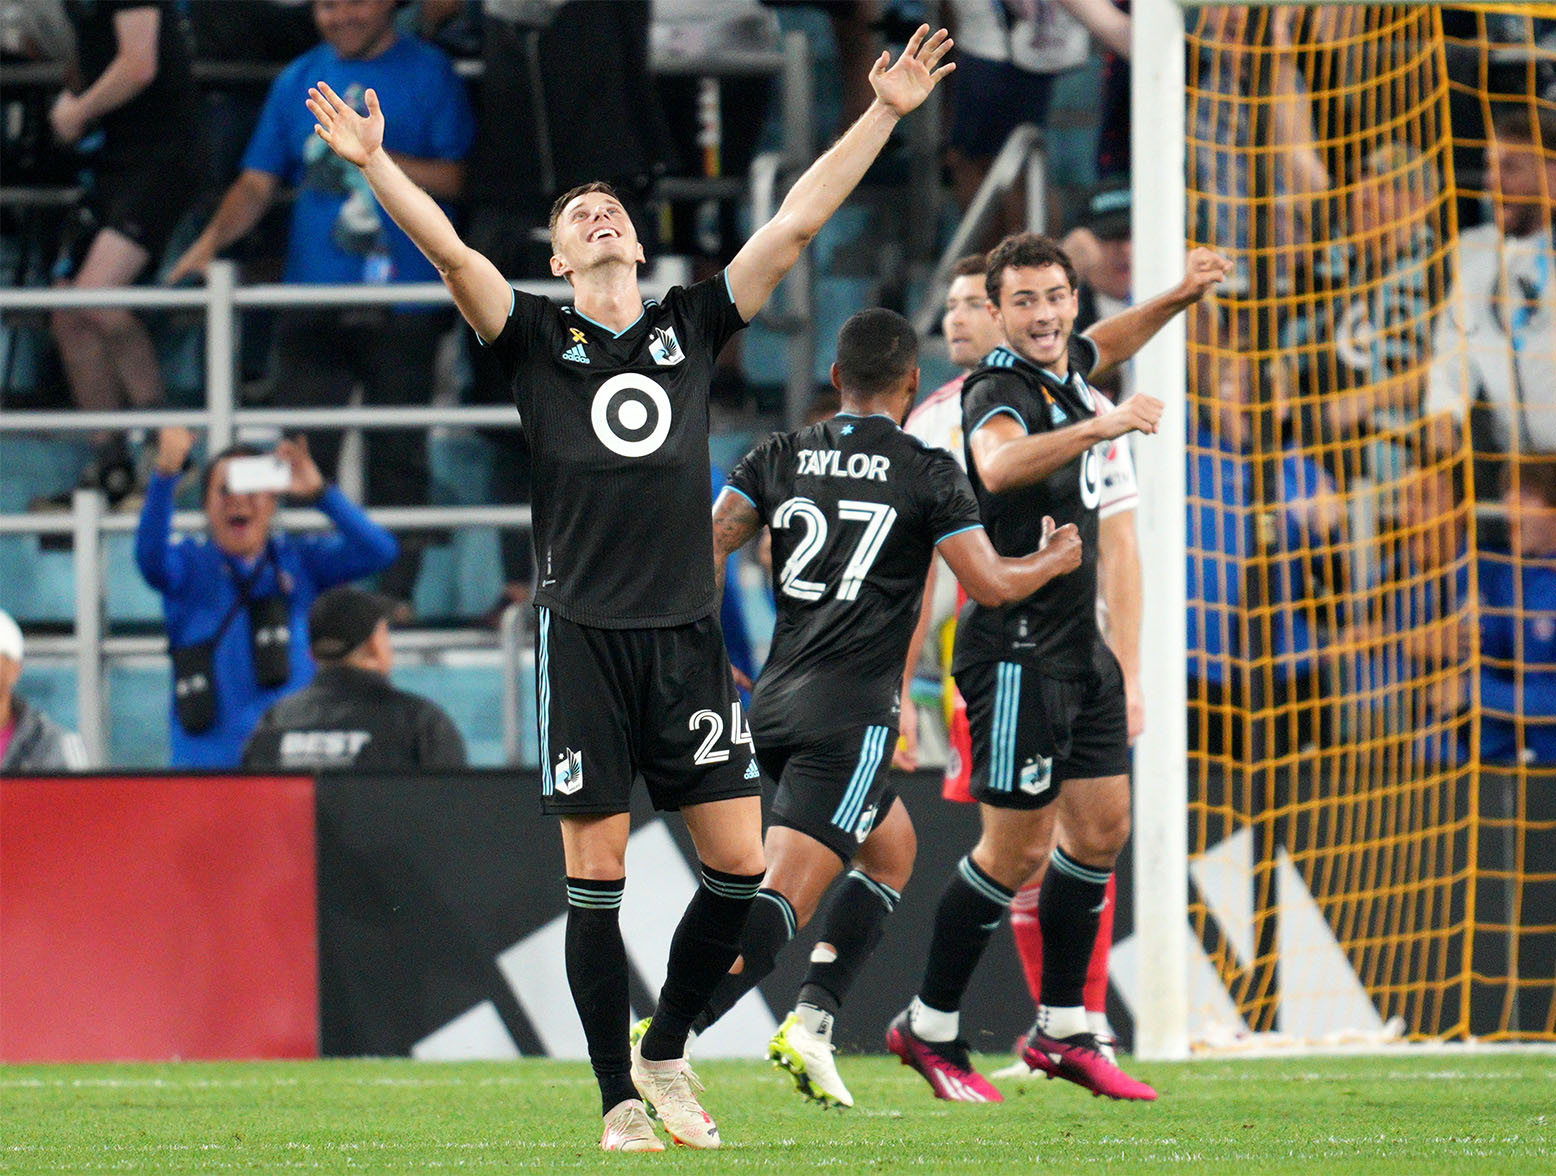 Sep 9, 2023; Saint Paul, Minnesota, USA; Minnesota United midfielder Jan Gregus (24) and defender D.J. Taylor (27) and defender Devin Padelford (right) react after a goal by midfielder Franco Fragapane (not pictured) against the New England Revolution during stoppage time at Allianz Field. Mandatory Credit: Matt Blewett-USA TODAY Sports